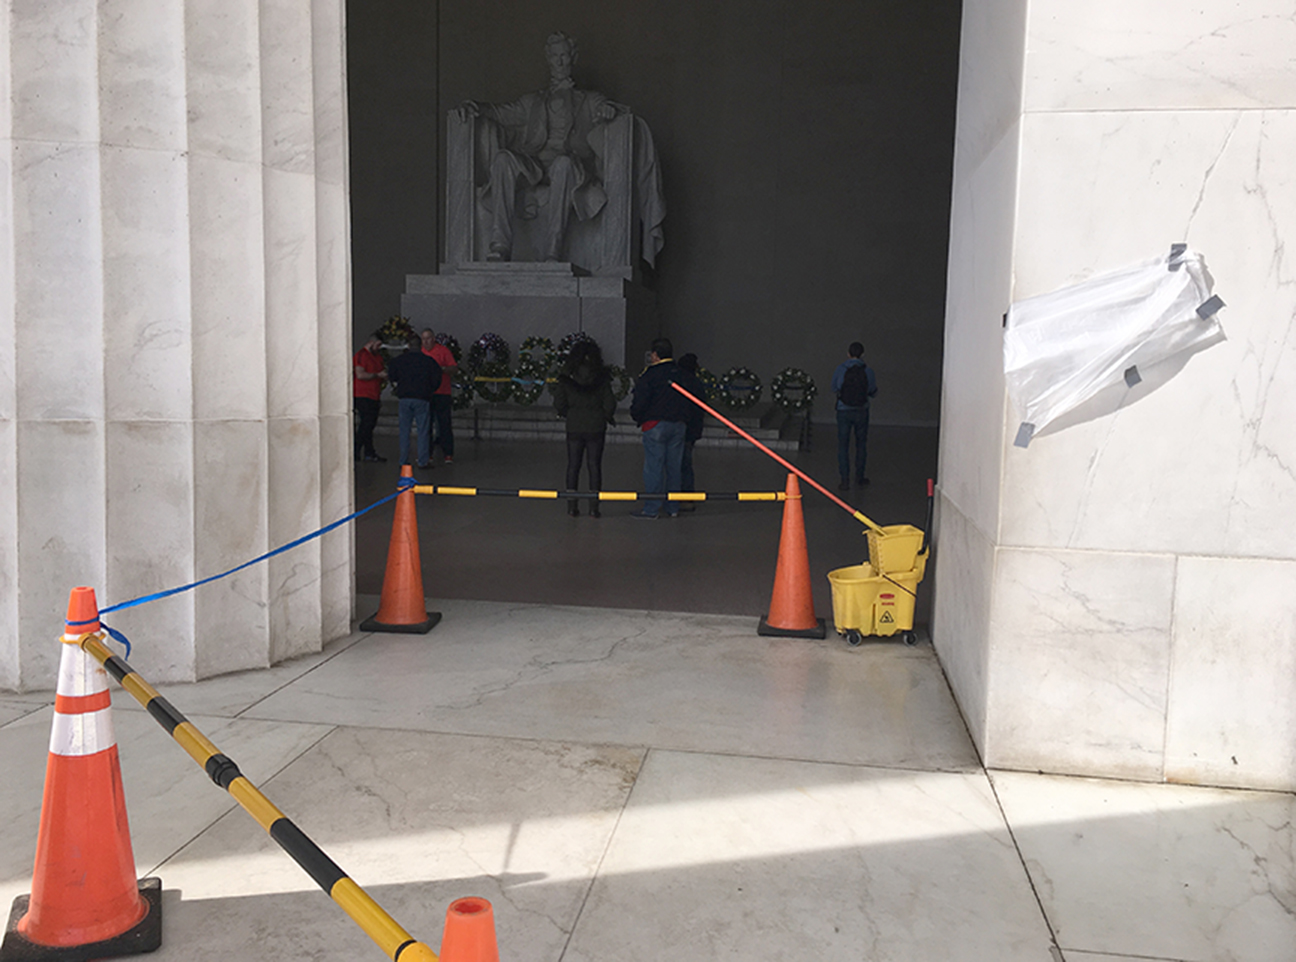 Three of D.C.'s most visited monuments damaged with graffiti over holiday weekend
	